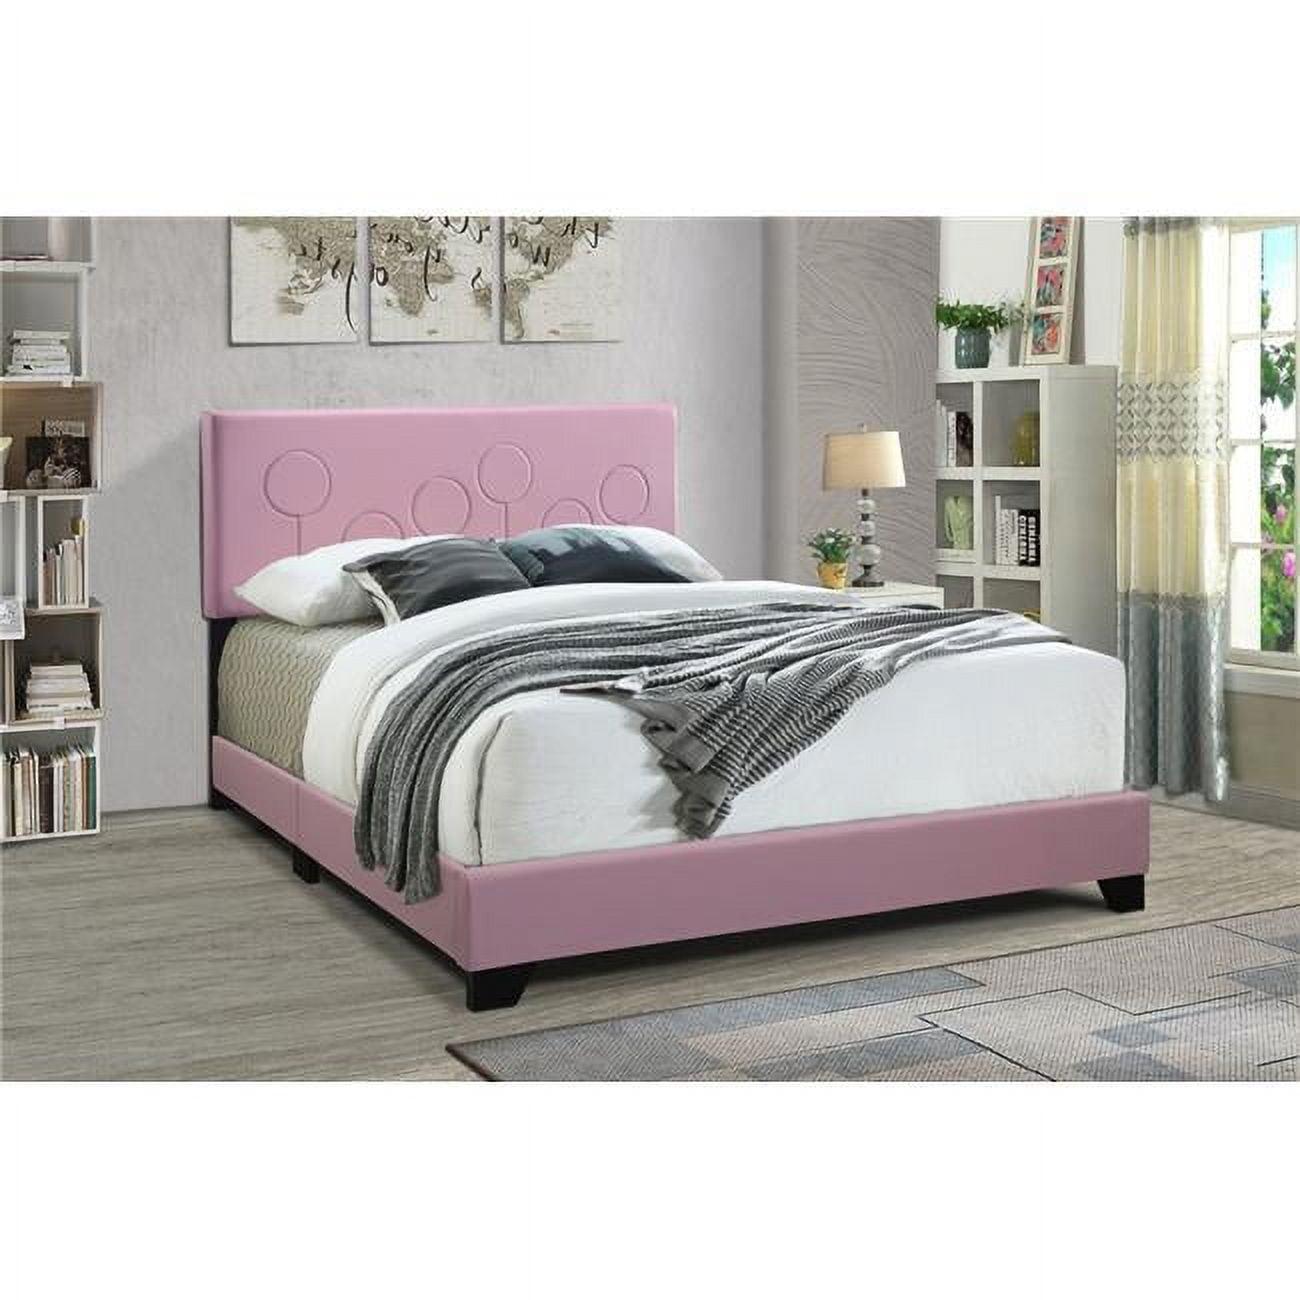 Queen Bubblegum Pink Faux Leather Upholstered Bed with Headboard